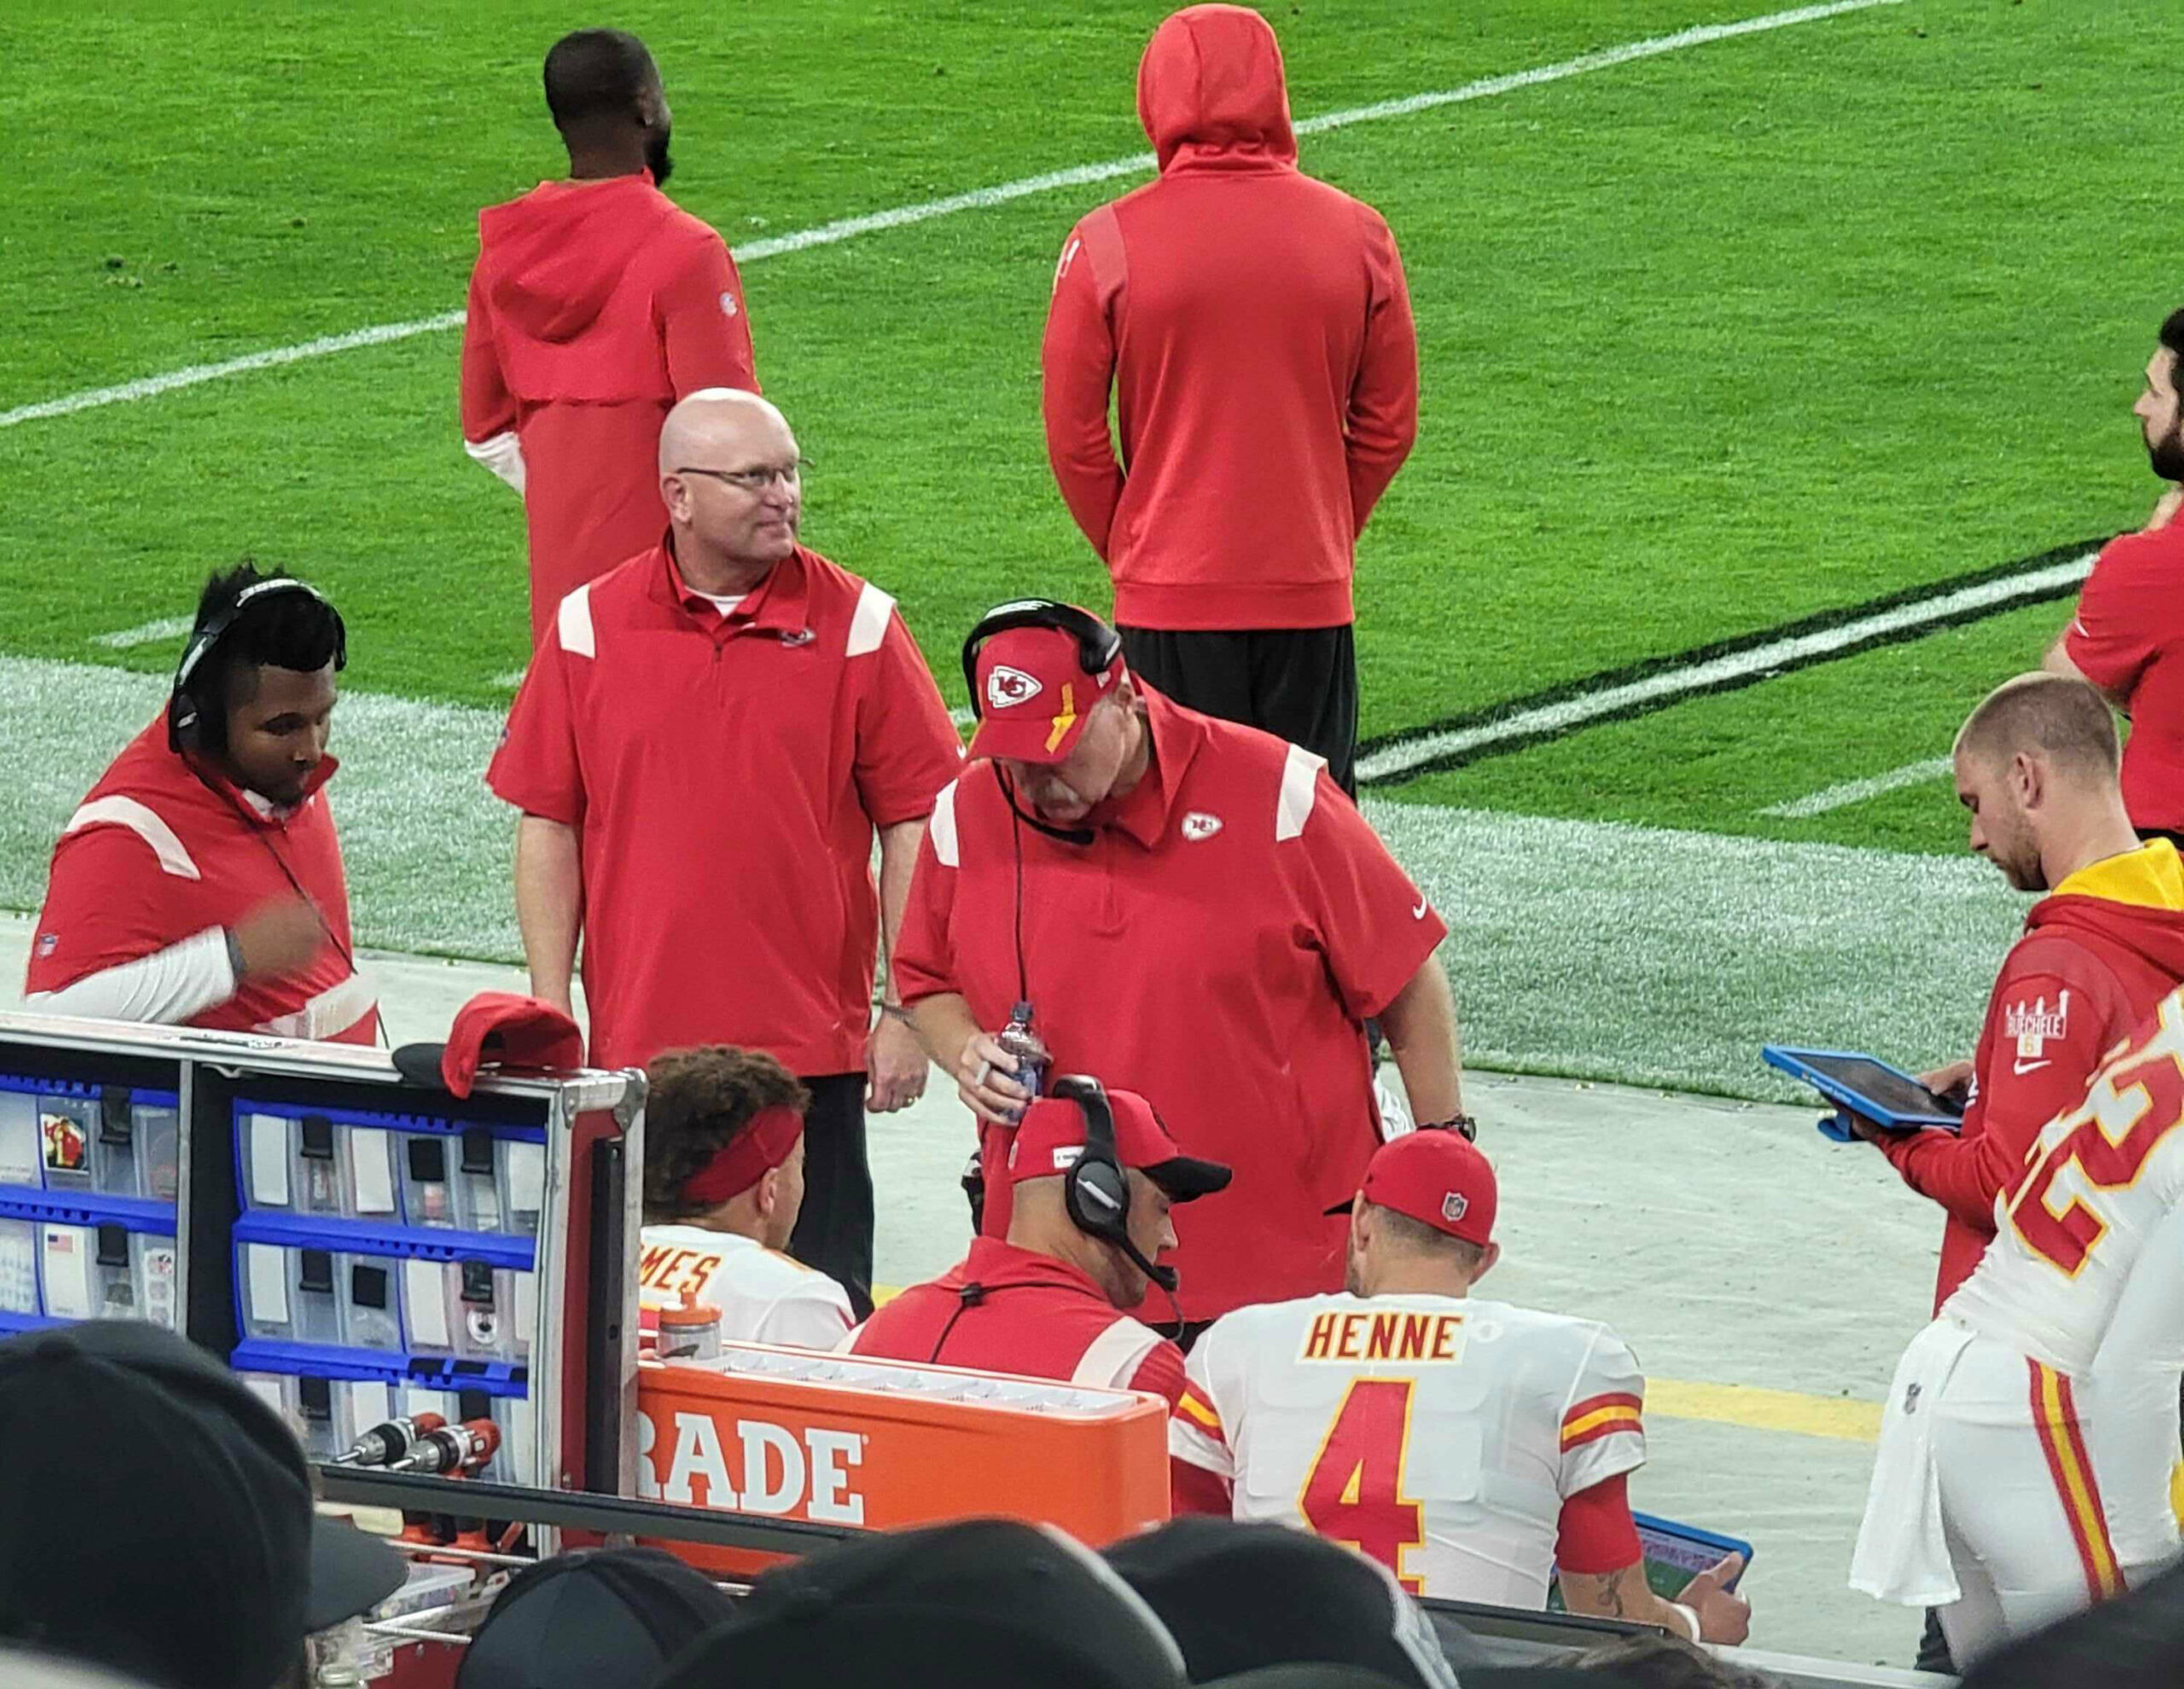 Kansas City Chiefs - Andy Reid, Patrick Mahomes, Chade Henne on sidelines